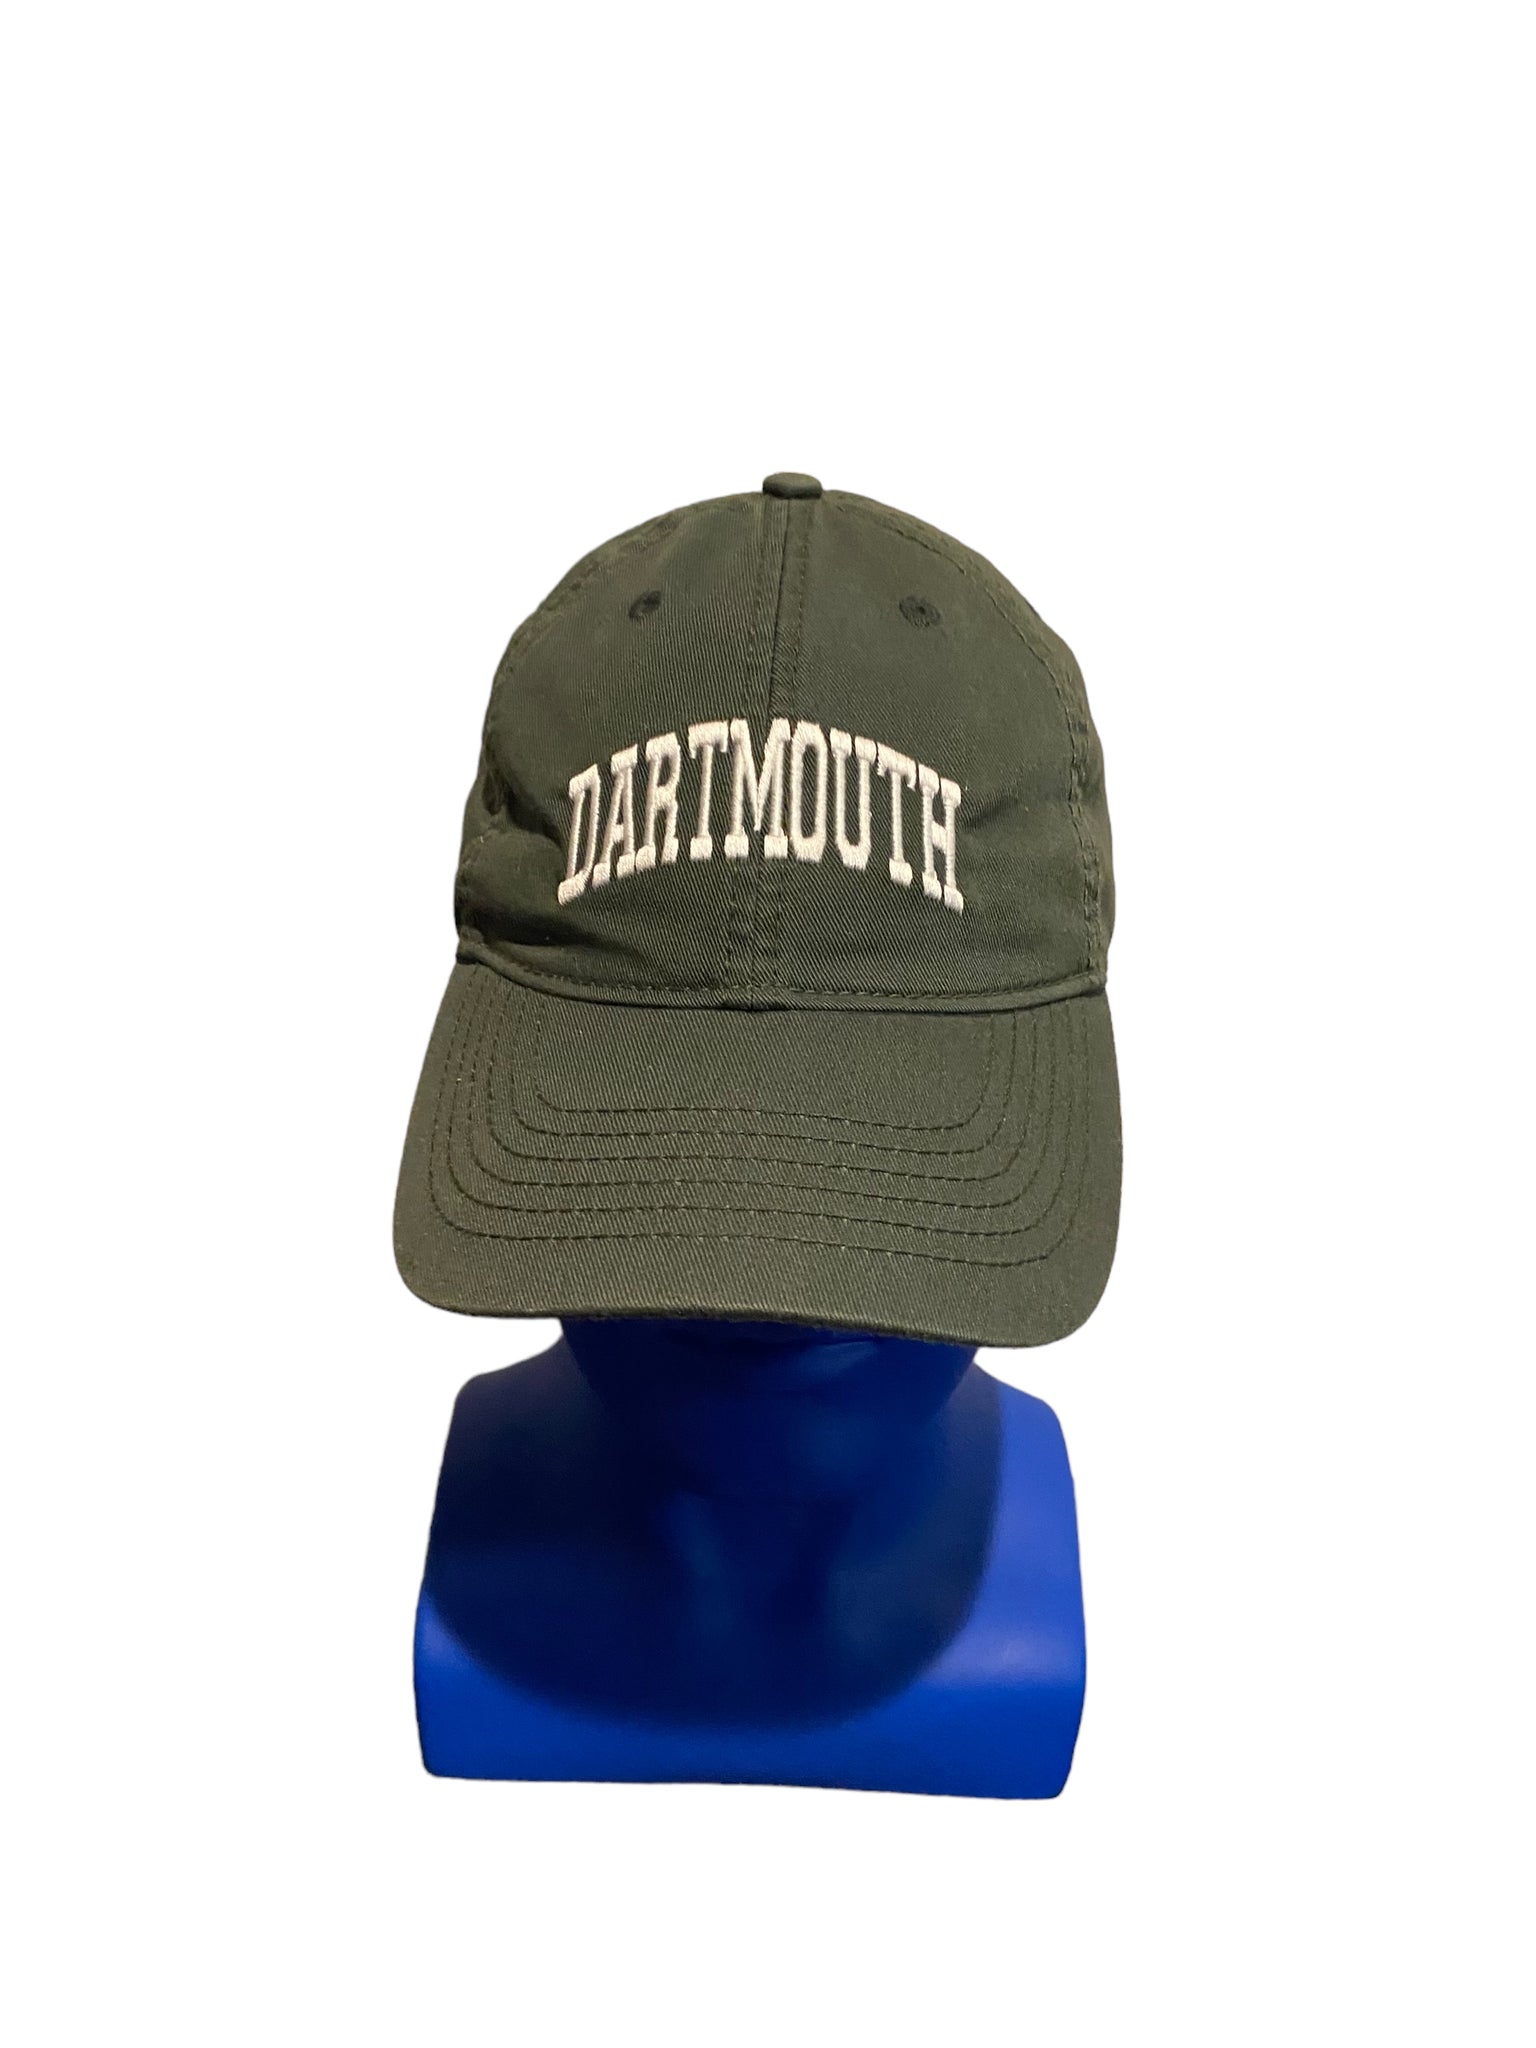 legacy hats darmouth embroidered dad hat adjustable strap dark green